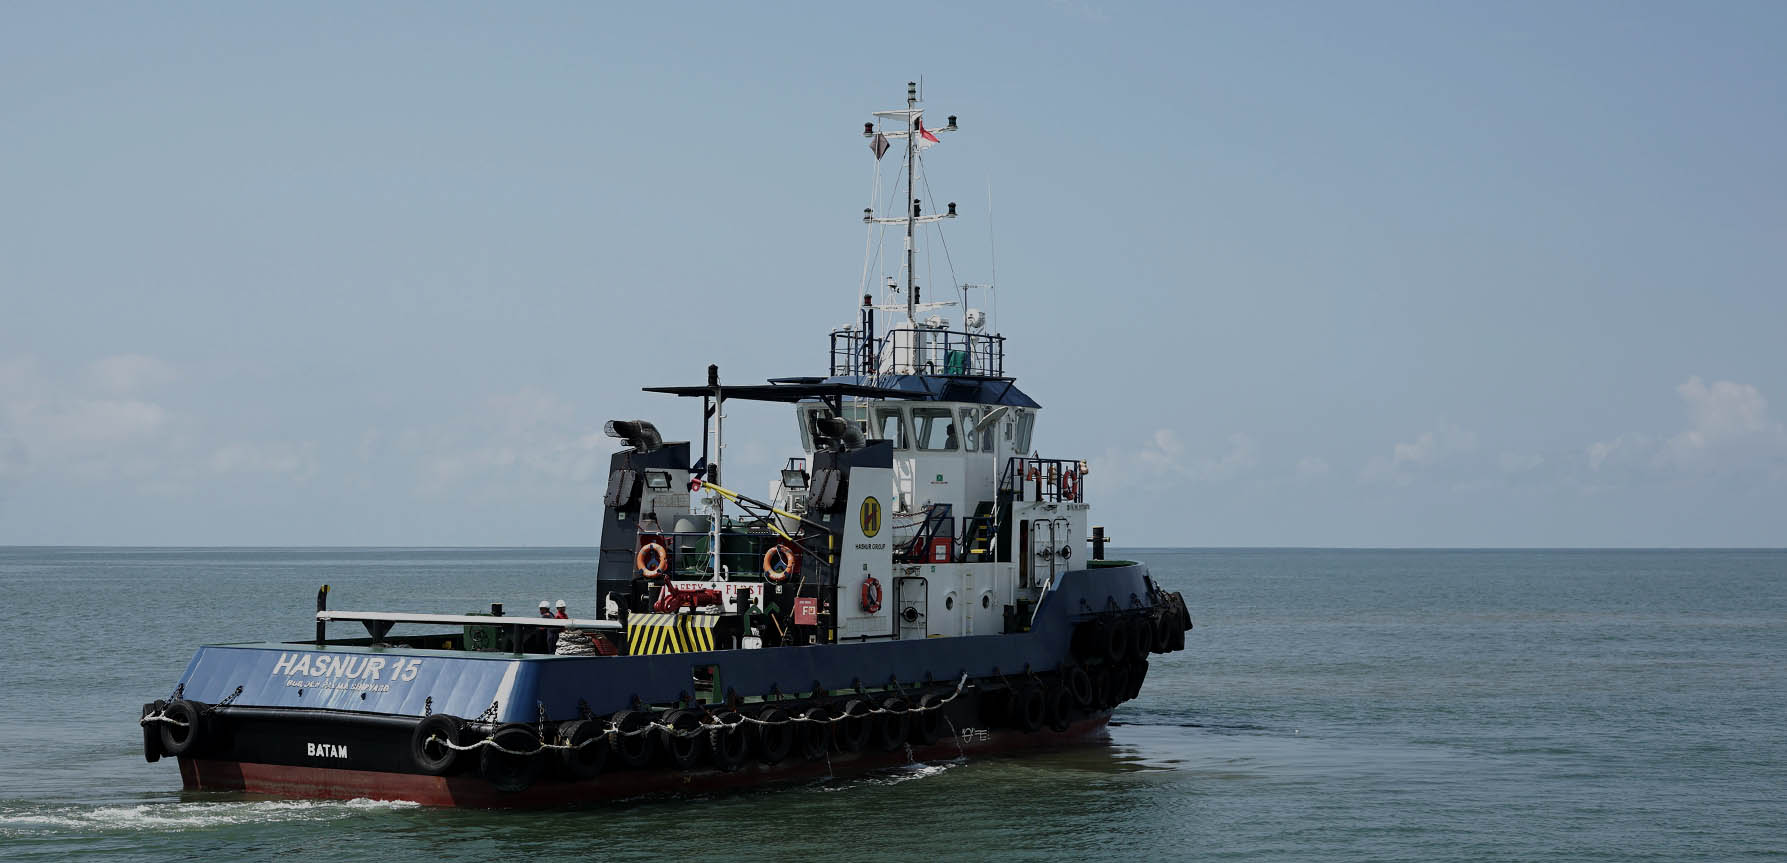 HAIS adds one set of tug and barge to its fleet